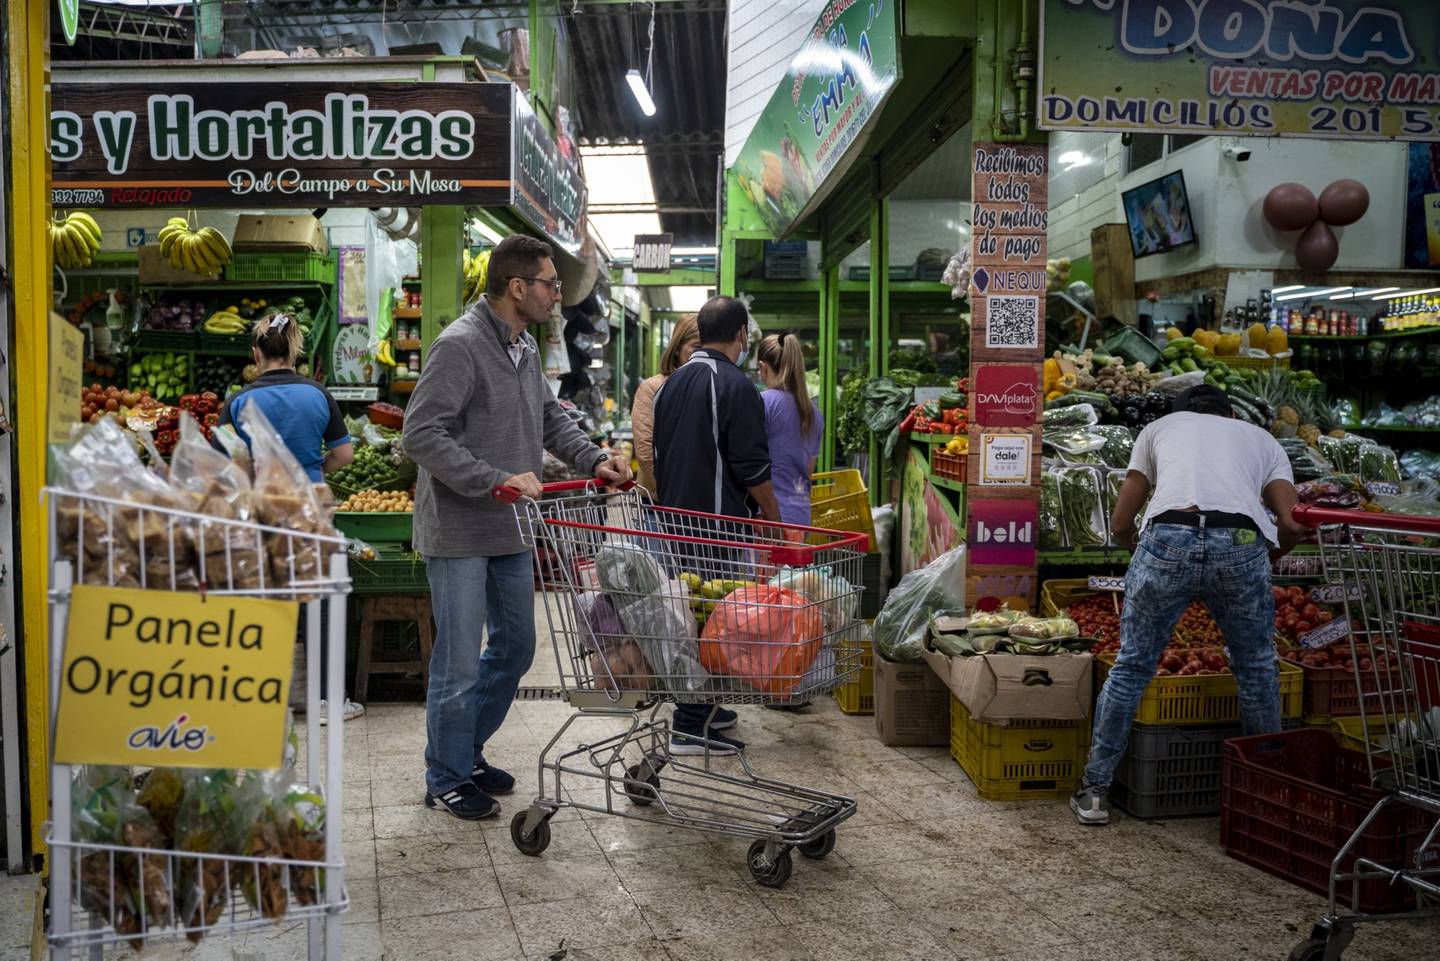 Shoppers buying food in Bogotá on March 30, 2023. The country's central bank is expected to announce a decision on interest rates and economists expect a rise in the cost of borrowing. Photographer: Nathalia Angarita/Bloomberg